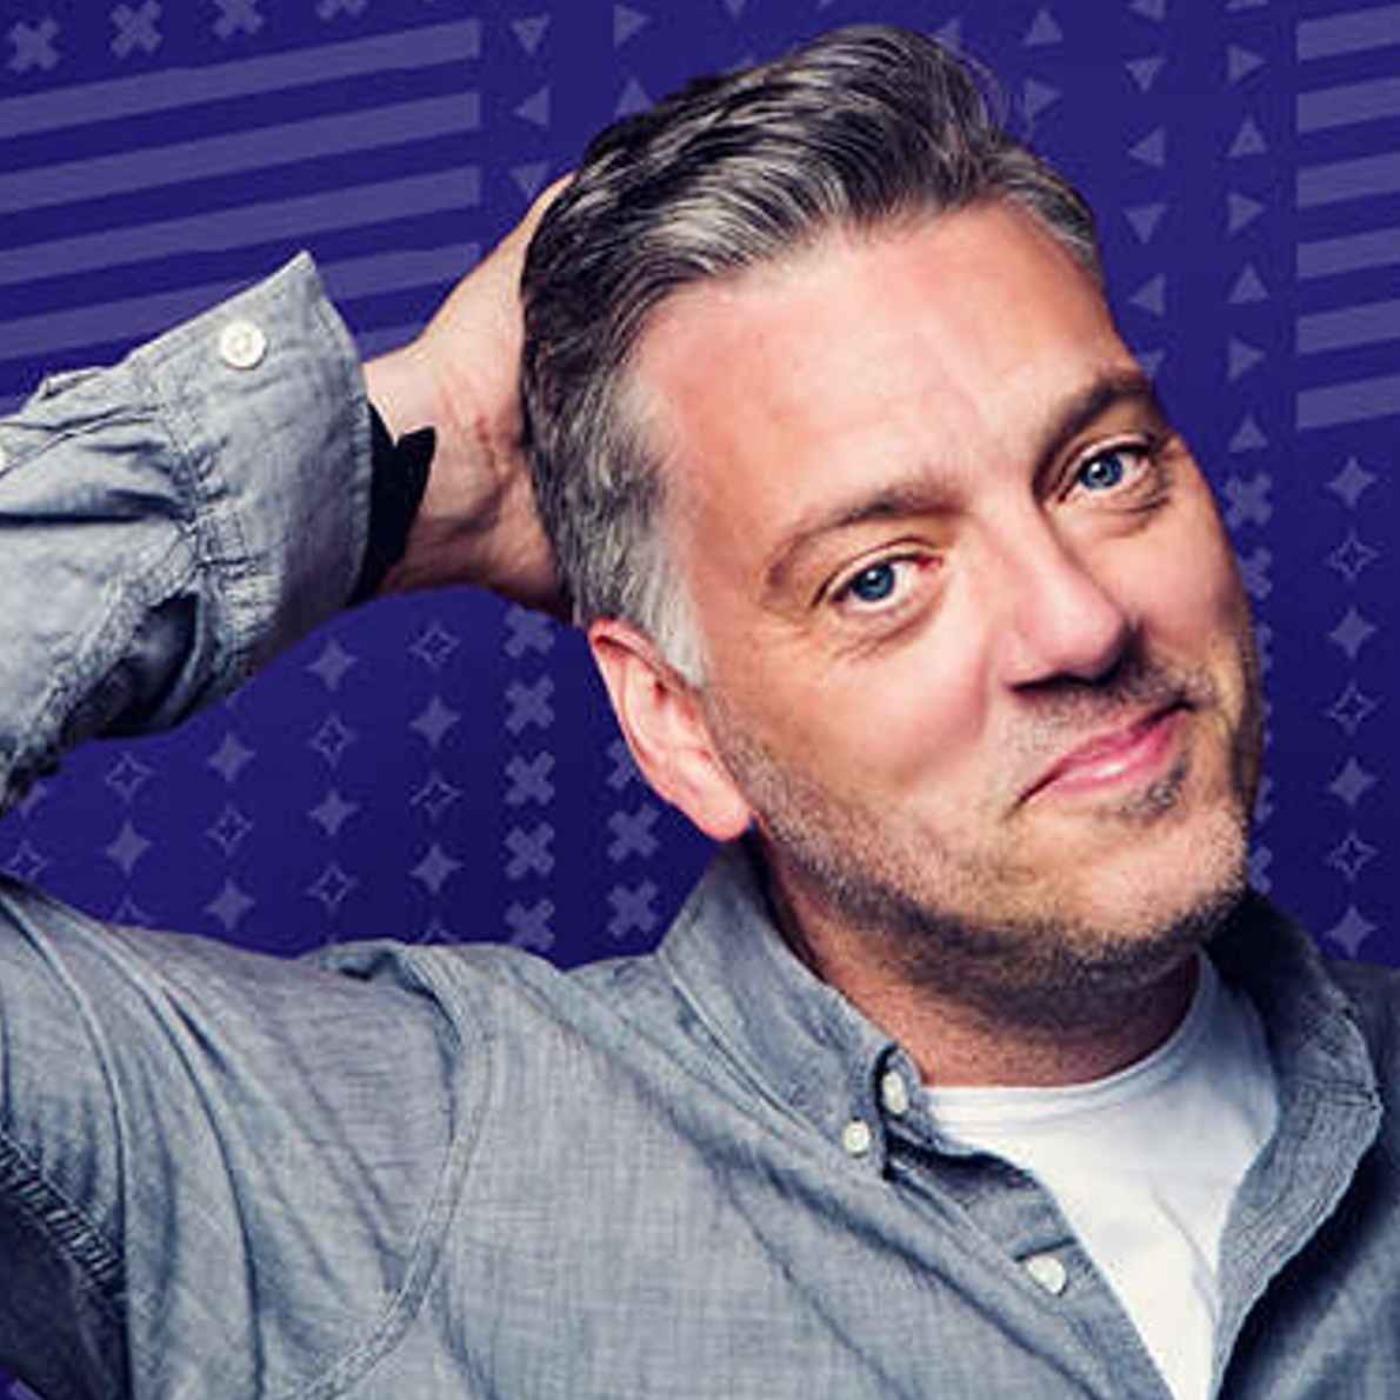 Iain Lee's Last EVER Radio Show by Iain Lee and Katherine Boyle | Podchaser